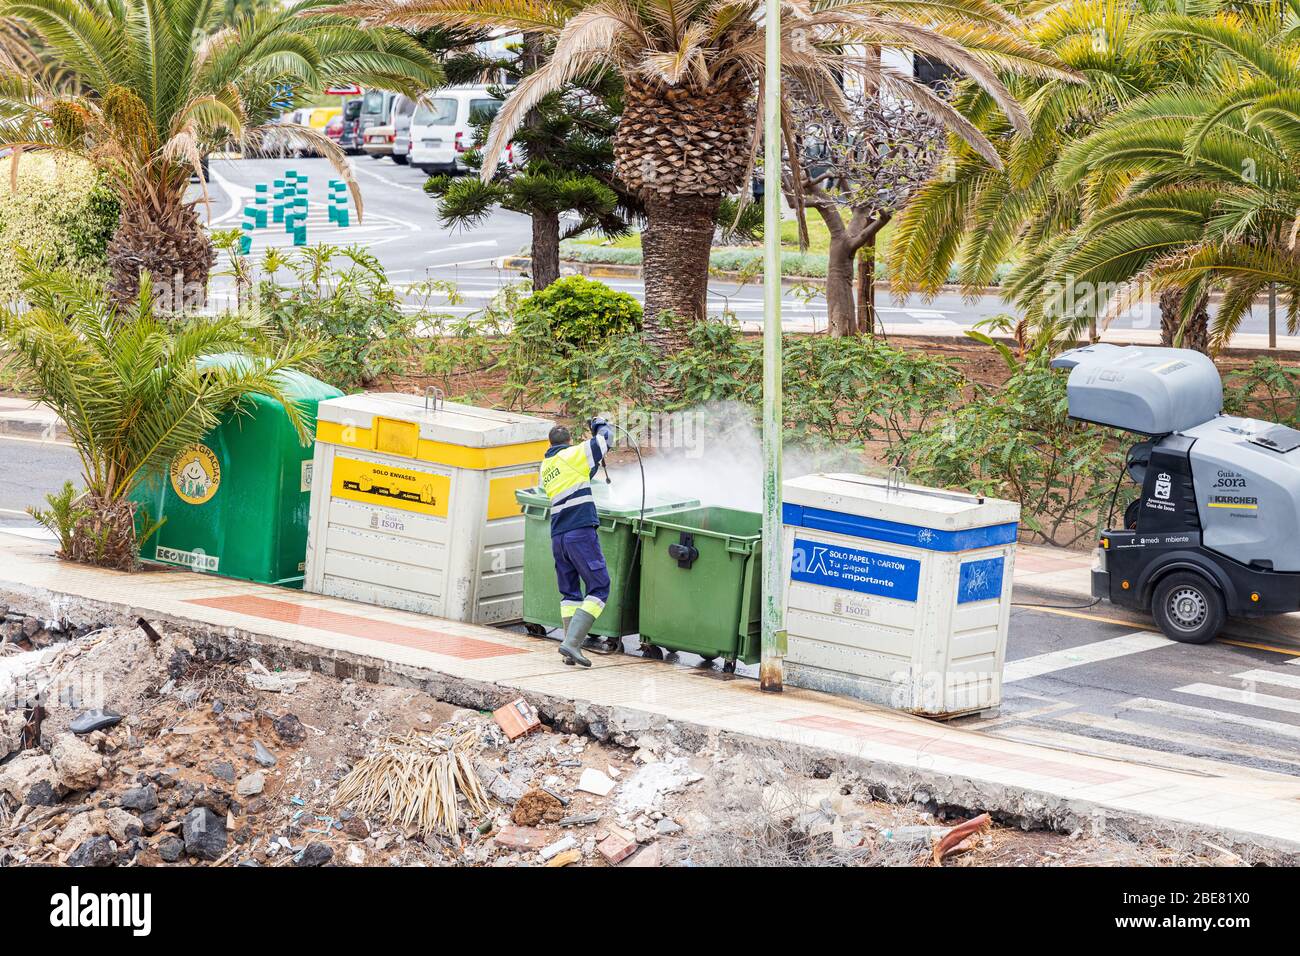 Jetwashing the bins with a disinfectant spray during the coronavirus pandemic in Playa San Juan, Tenerife, Canary Islands, Spain Stock Photo